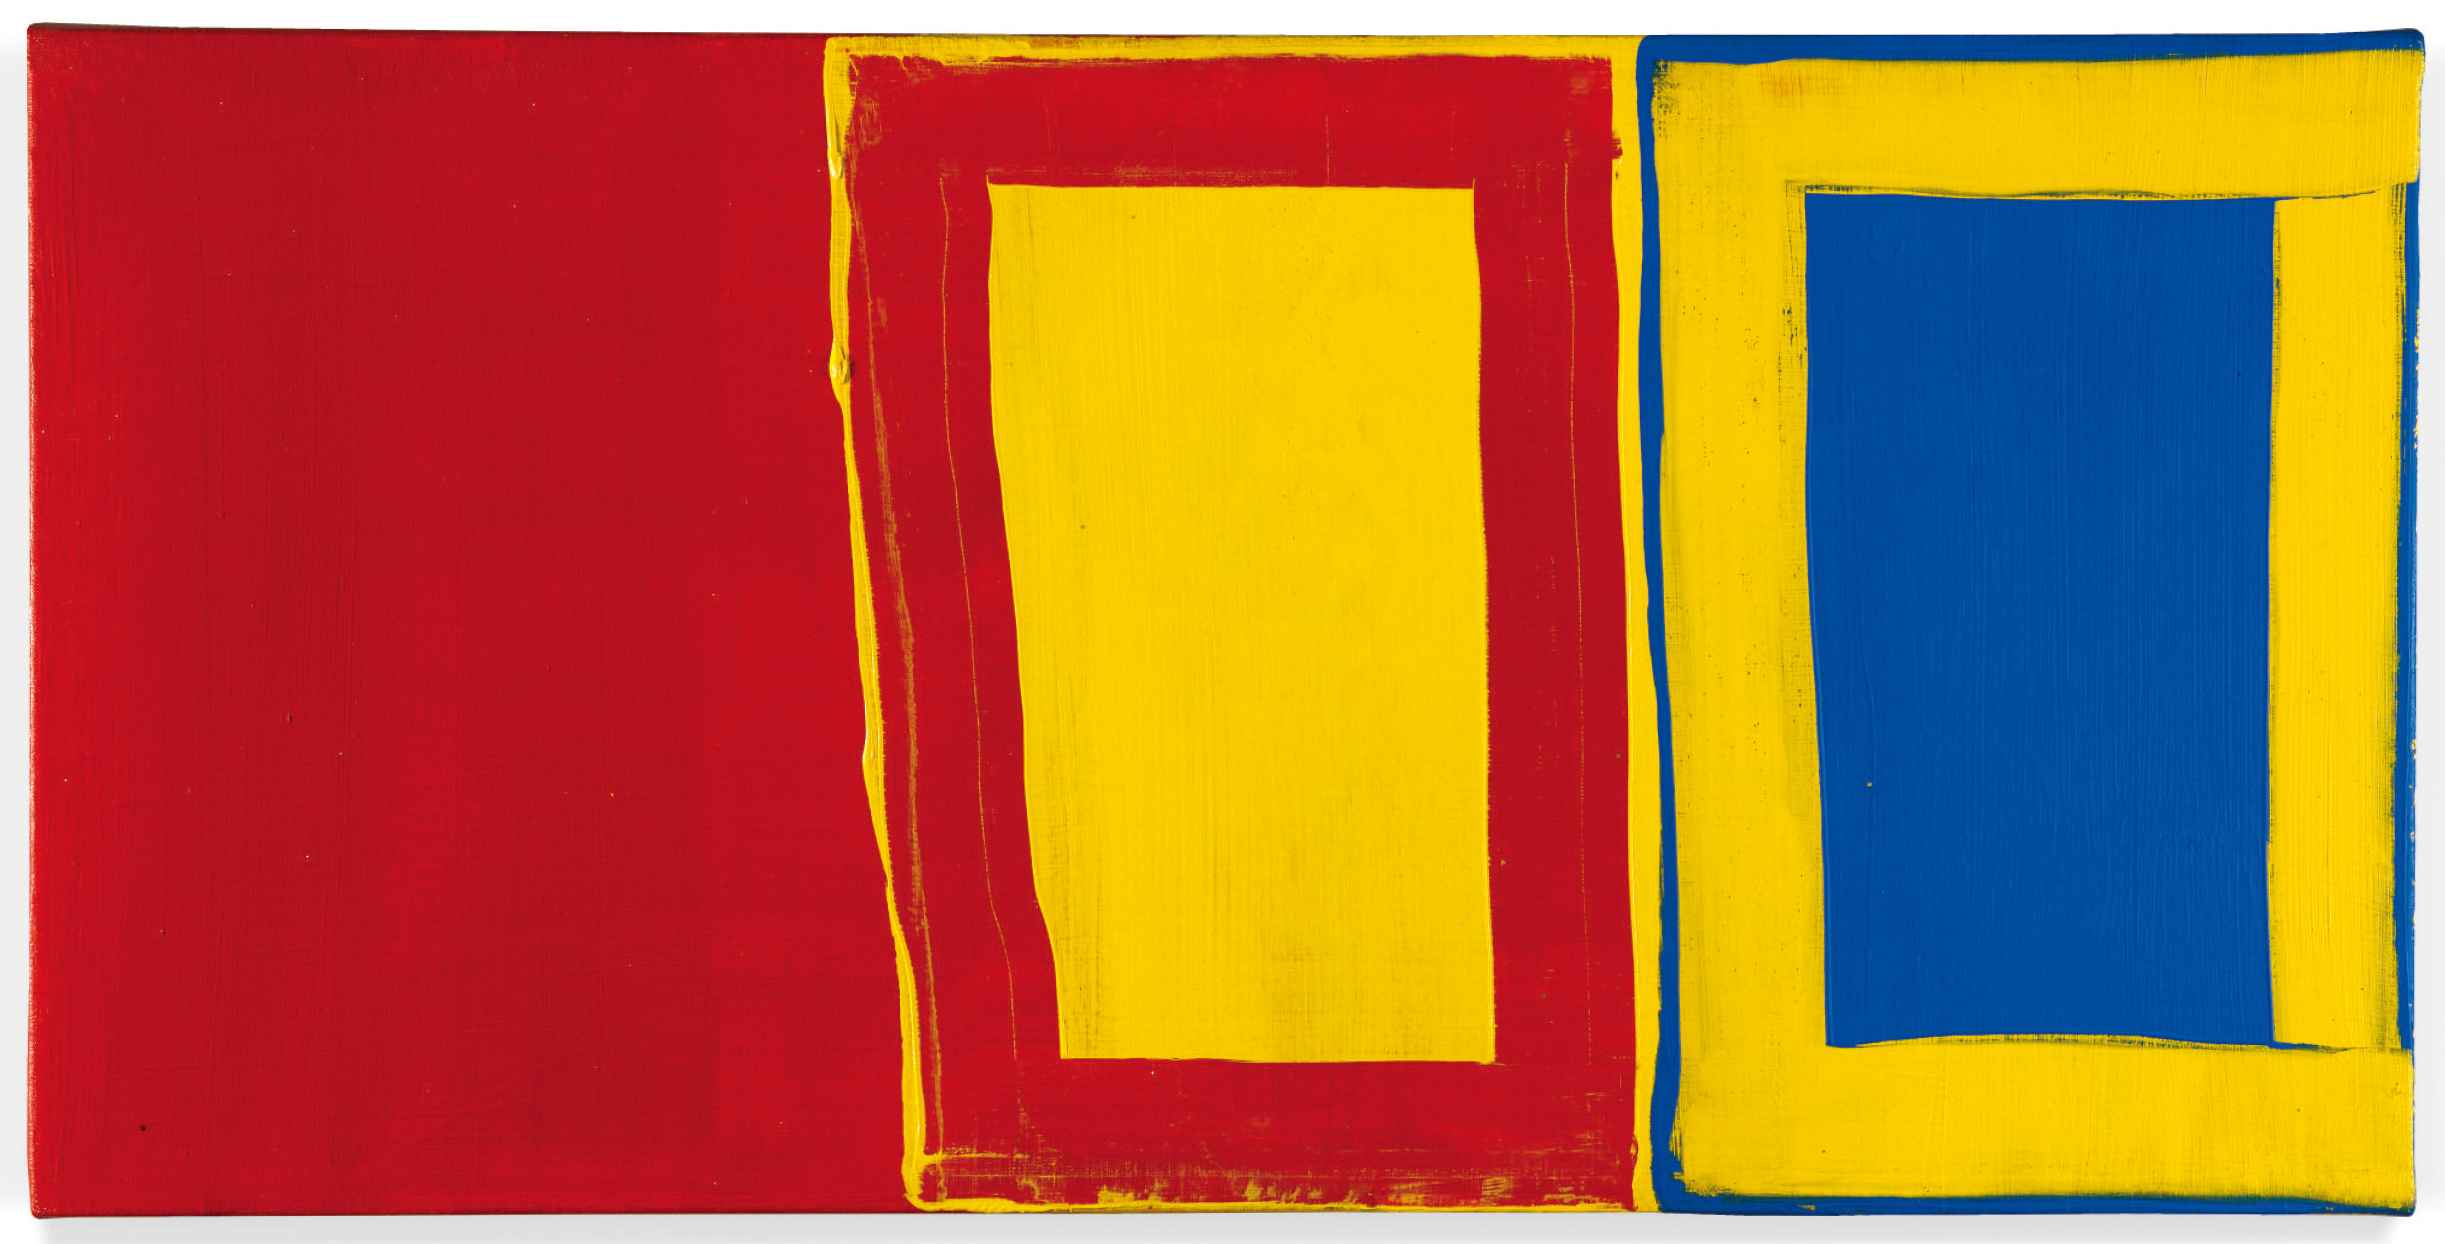 Mary Heilmann, The First Small Red Yellow Blue, 1975, ©Mary Heilmann